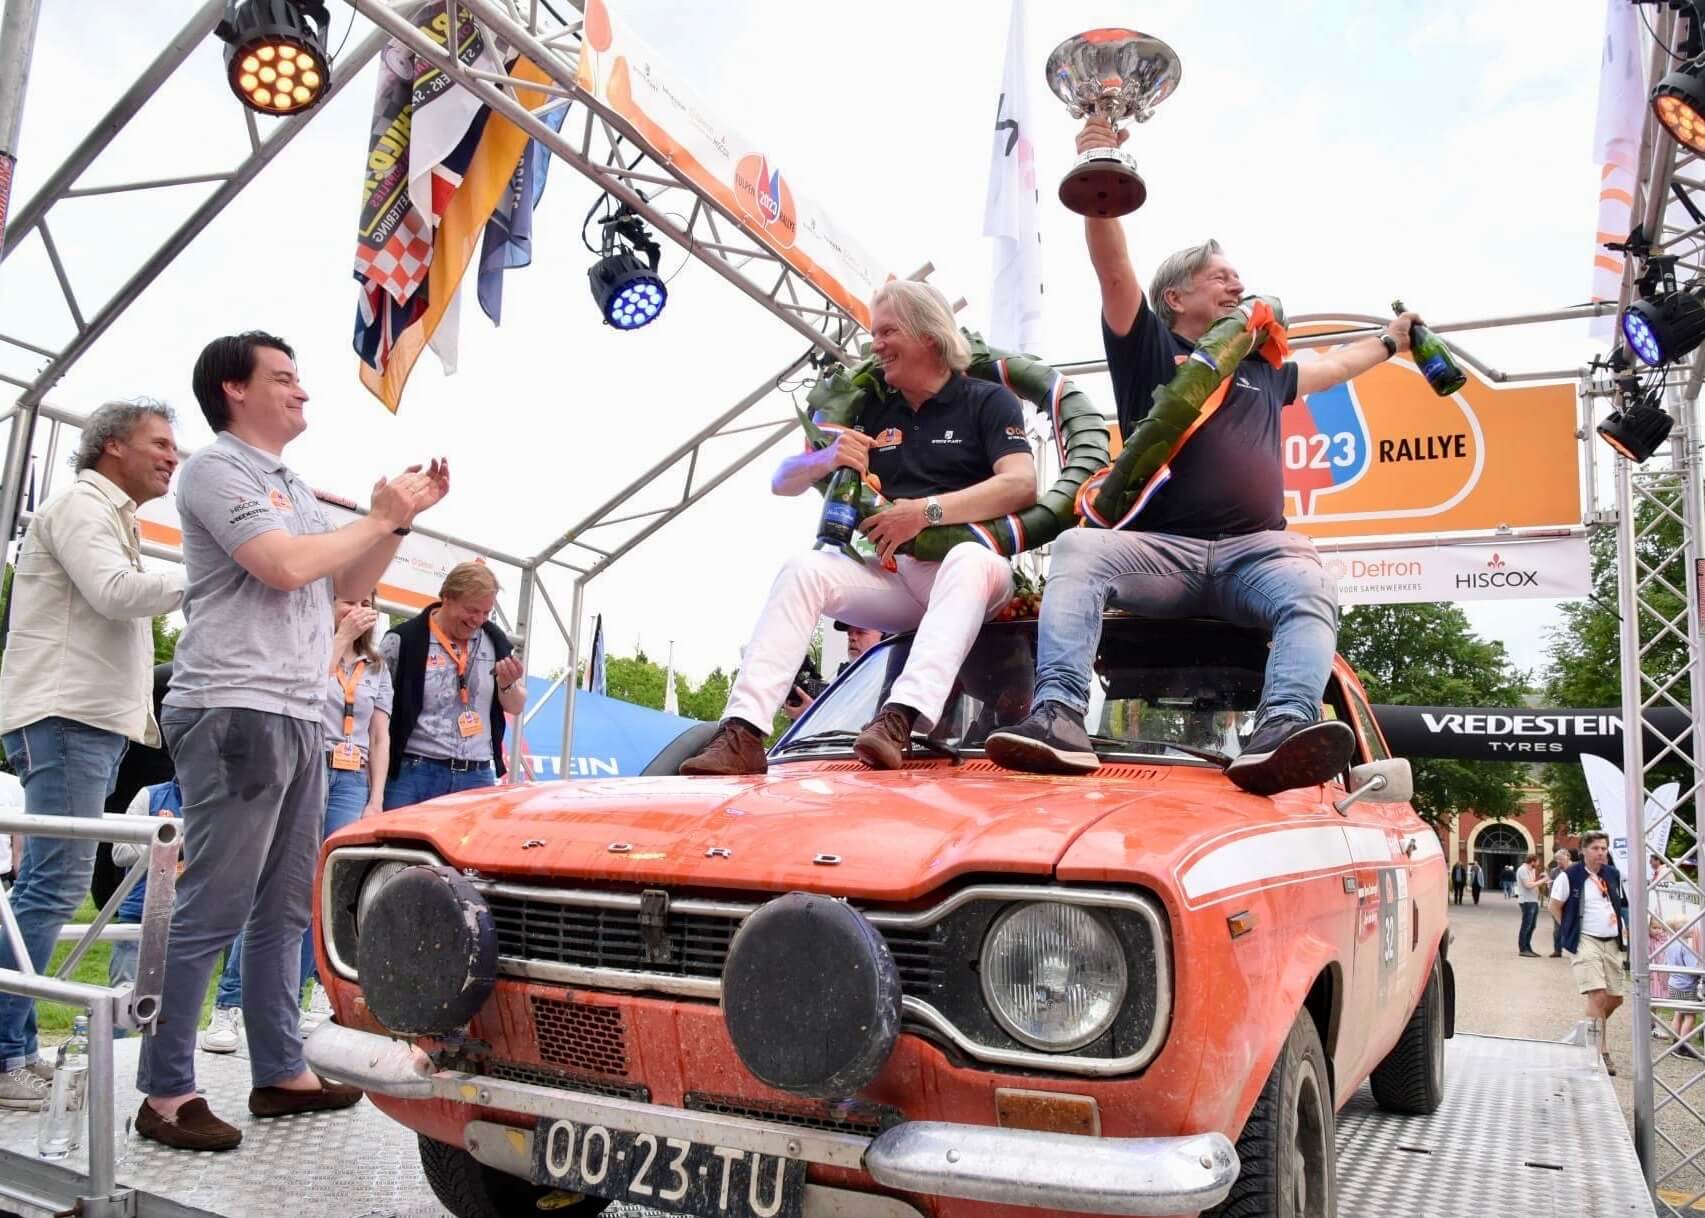 Winners of Tulip Rally celebrating on top of their car with trophy and champagne and supporters congratulating them